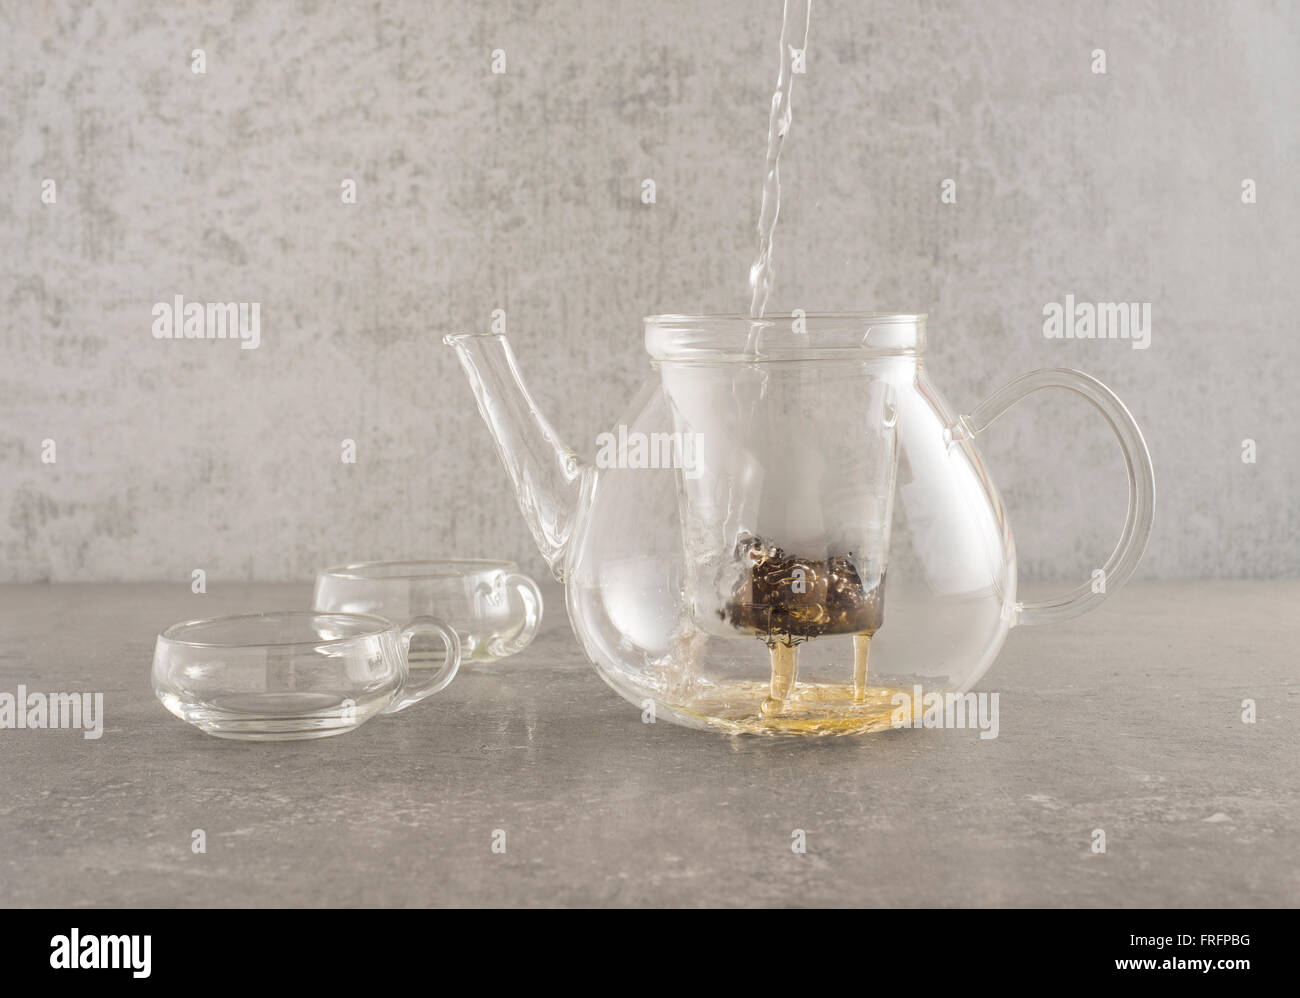 Hot water pouring in glass teapot and sifting through tea leaves. Two glass cups are placed on the side on a stone kitchen table Stock Photo